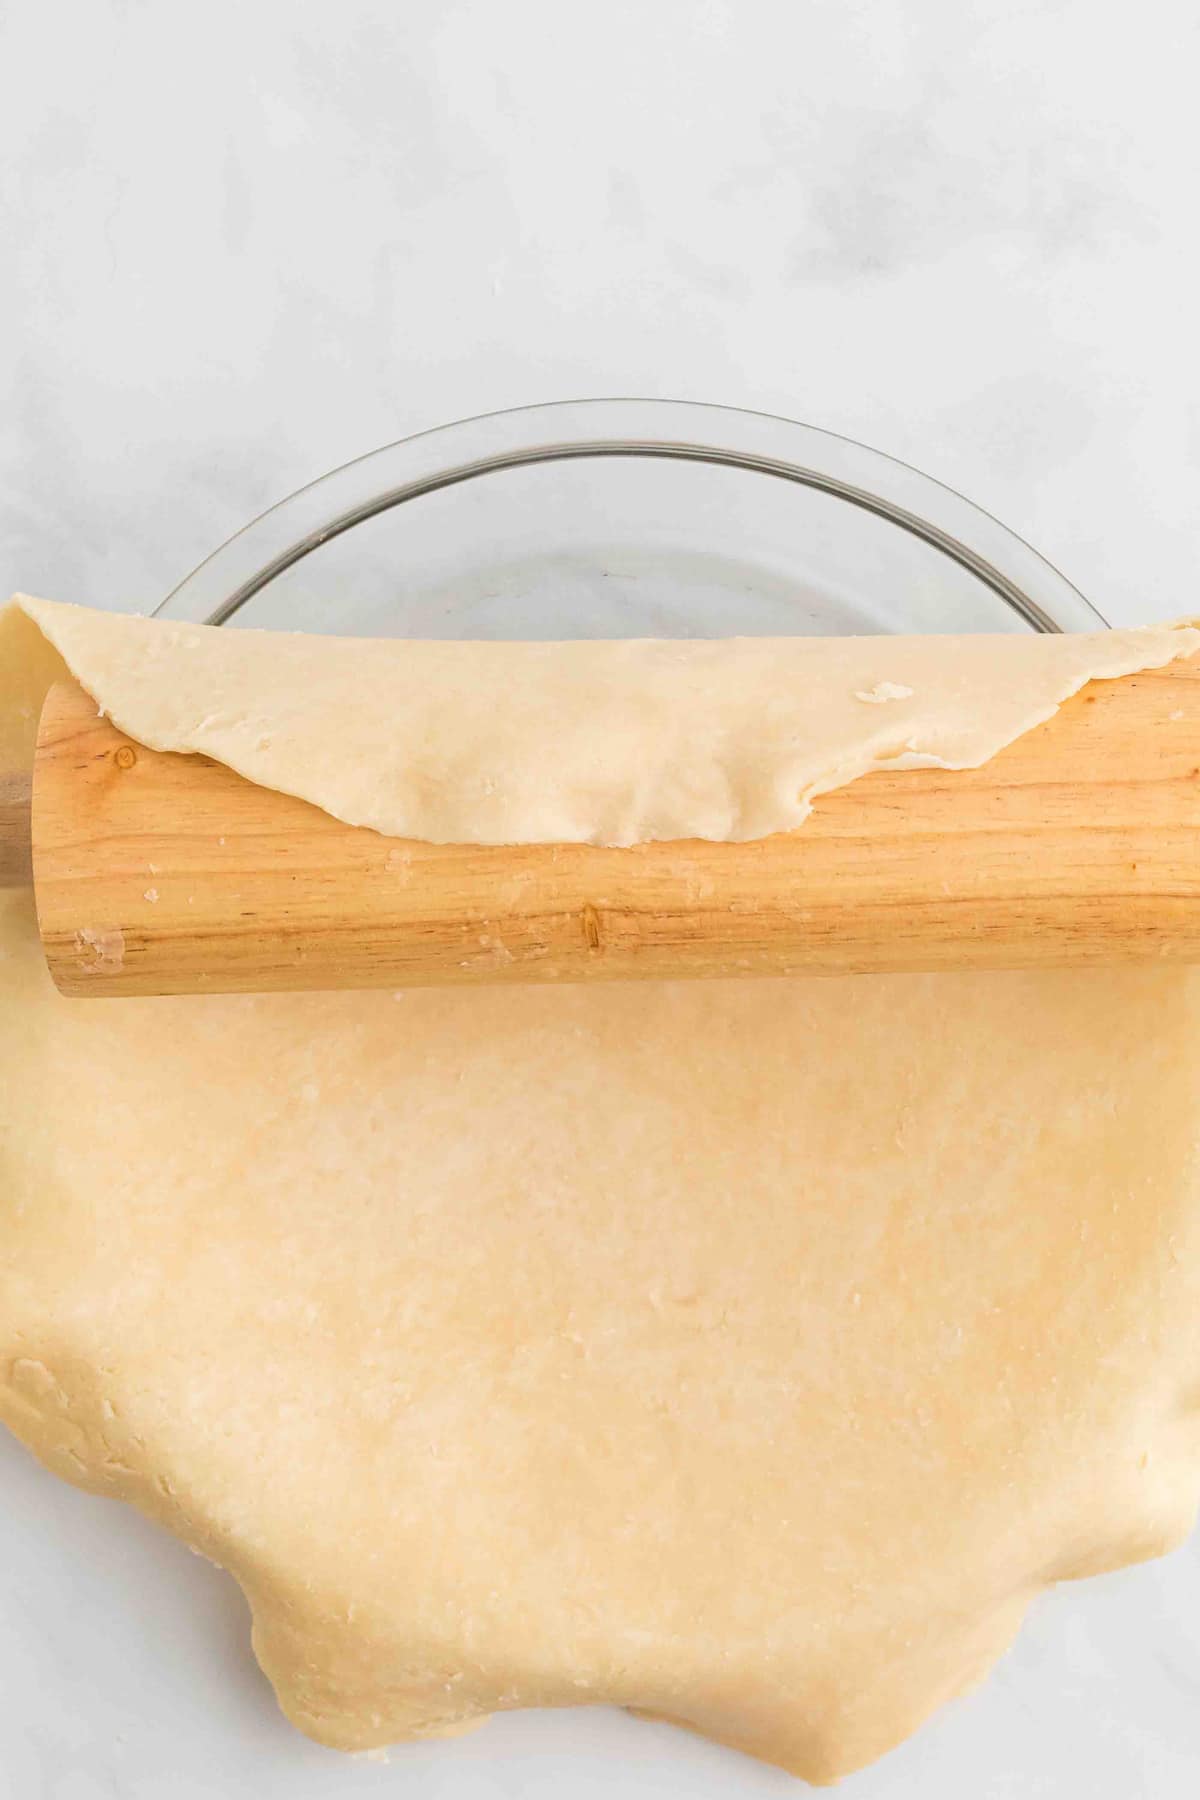 The rolled out pie crust being spread in the pie pan